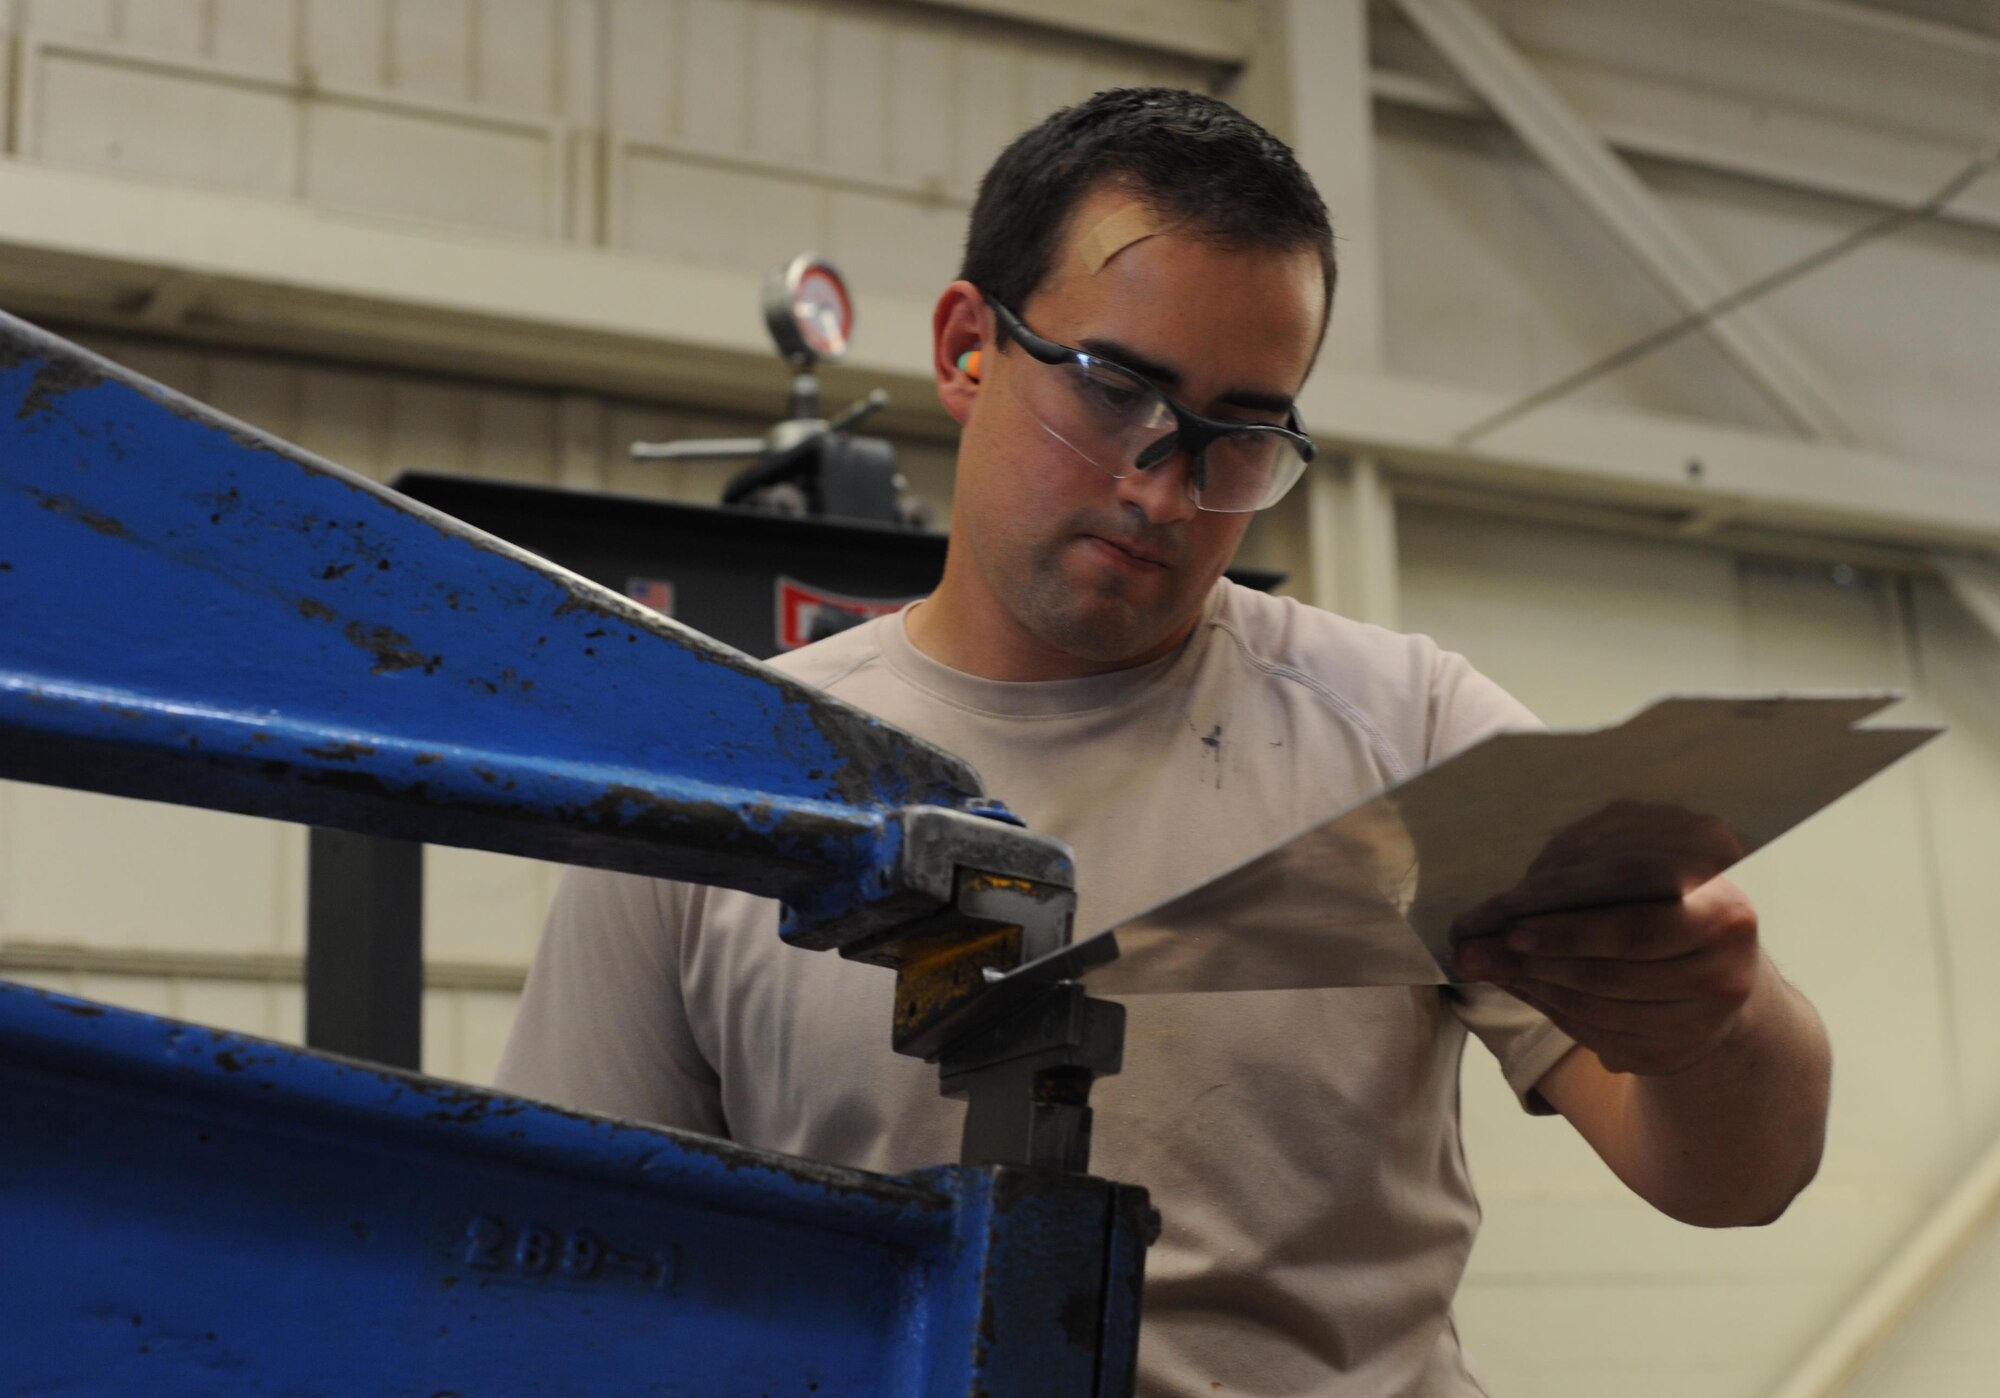 U.S. Air Force Airman 1st Class Christopher Briggs, 7th Equipment Maintenance Squadron aircraft structural apprentice, shapes a sheet of metal July 7, 2016, at Dyess Air Force Base, Texas. In the sheet metal shop, there are more than 38 machines used to either cut, trim, bend, notch, polish or form a variety of metal and tubing. (U.S. Air Force photo by Airman 1st Class Rebecca Van Syoc)